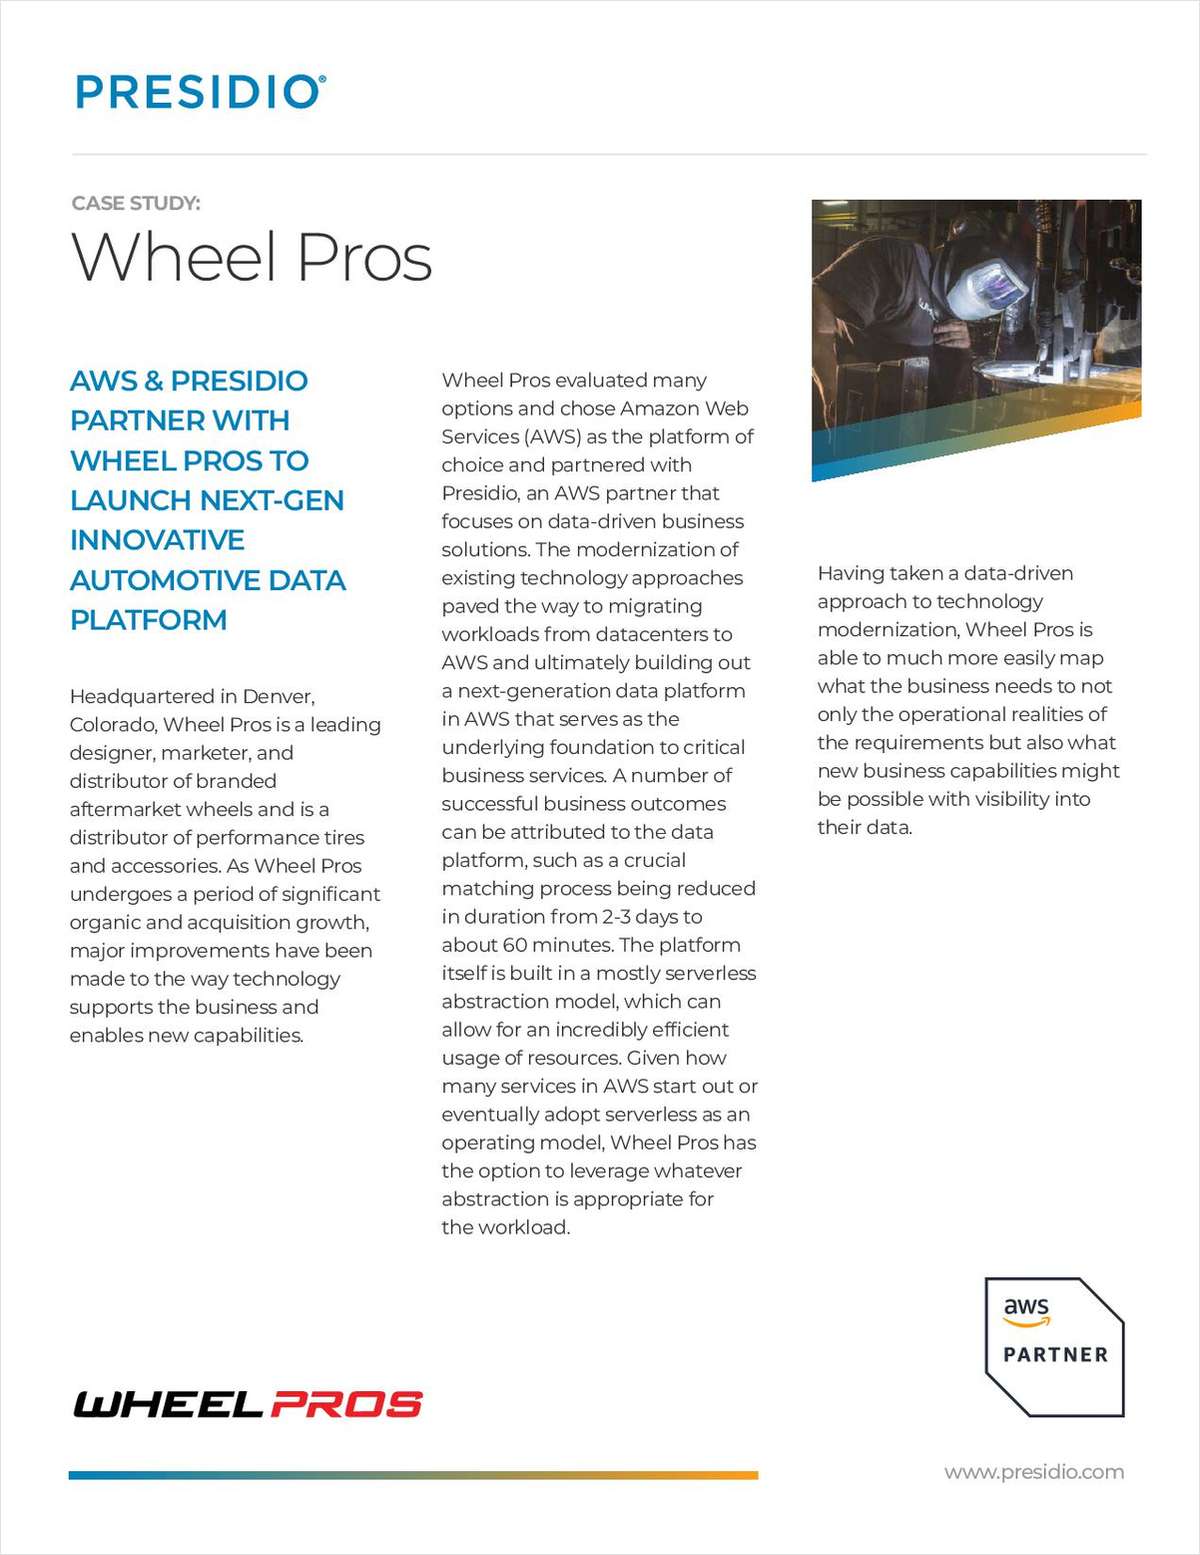 Leading aftermarket wheels and accessories distributor takes data-driven approach to technology modernization.